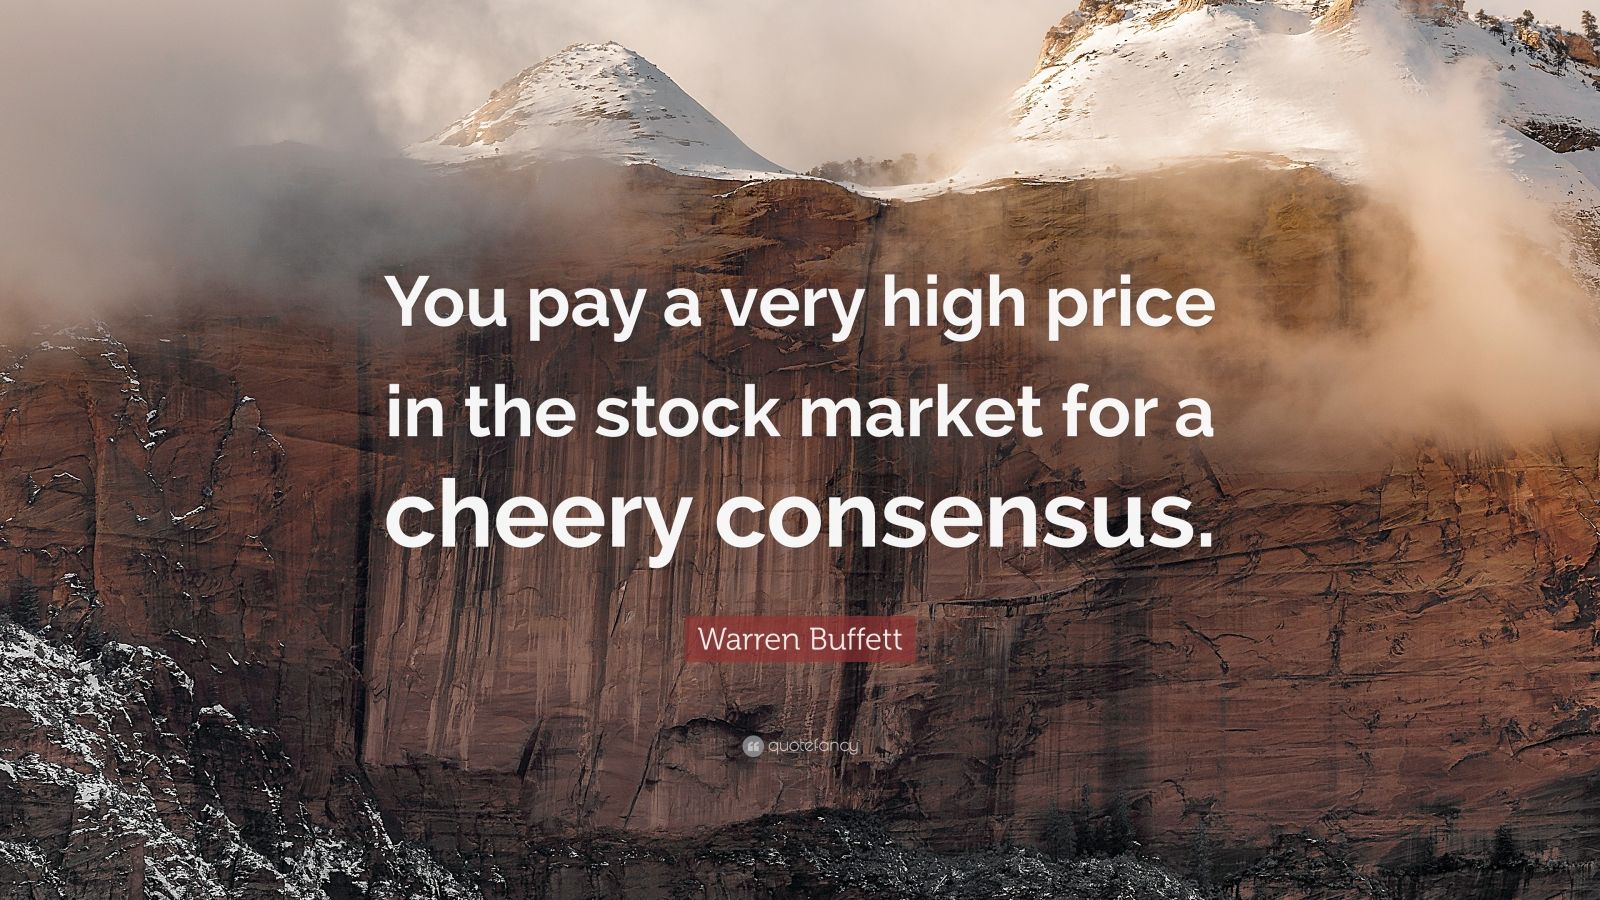 Warren Buffett Quote: “You pay a very high price in the stock market